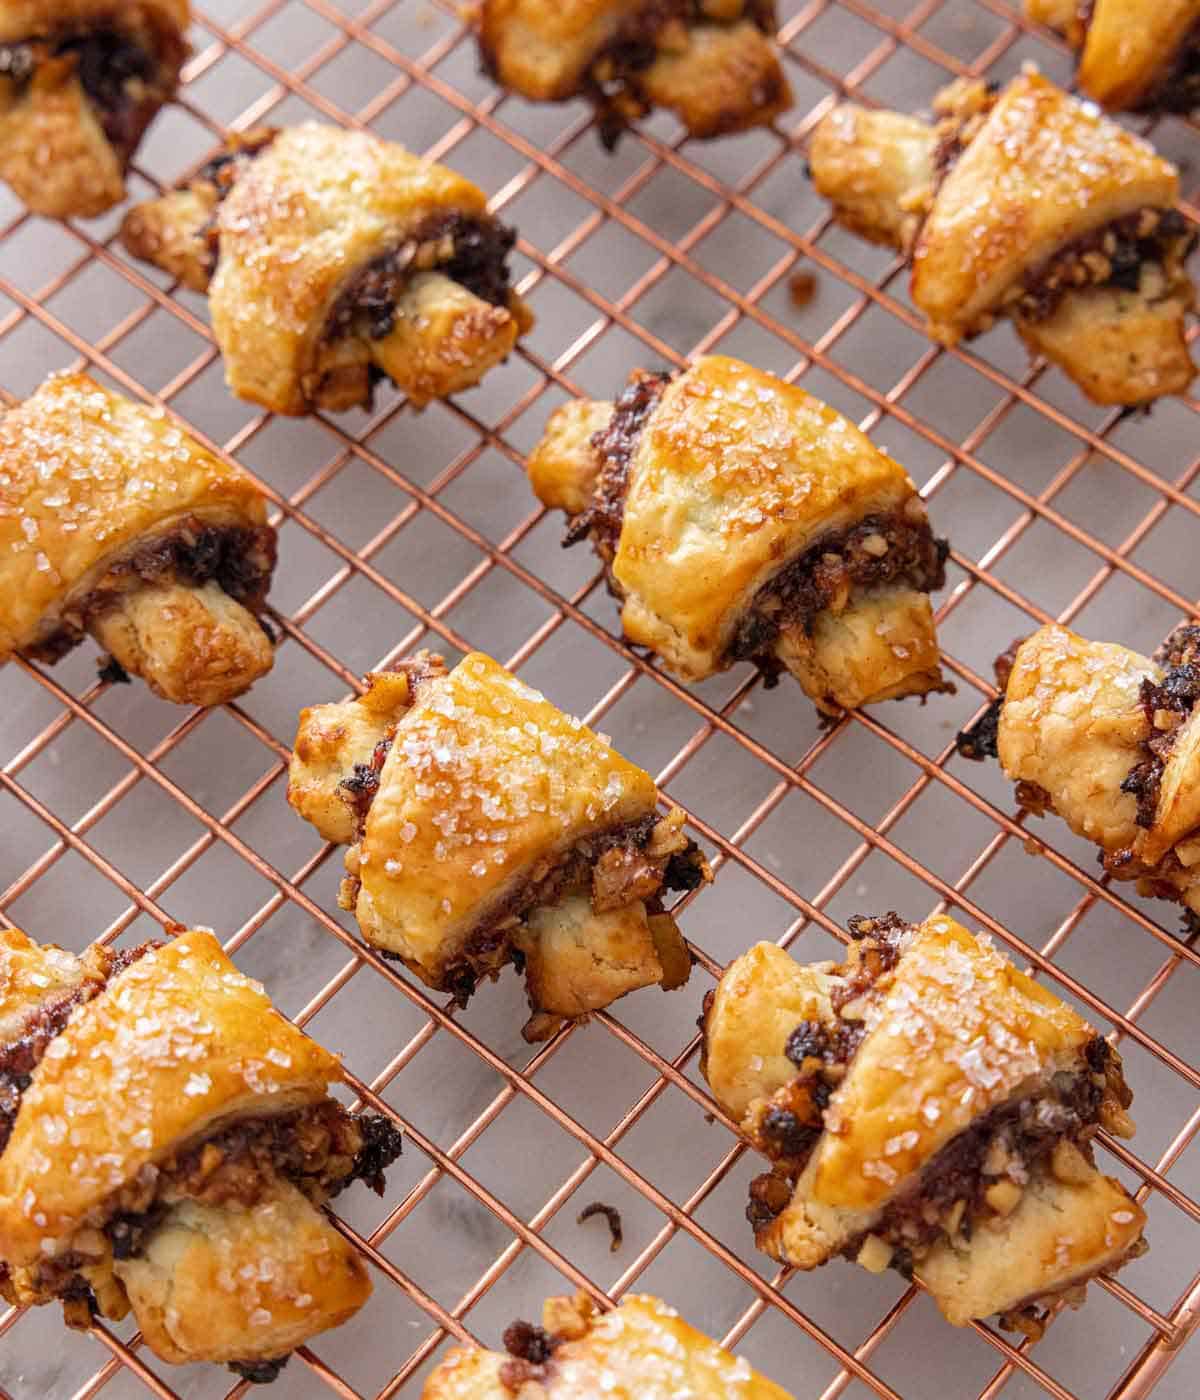 Multiple rugelach on a wire cooling rack.